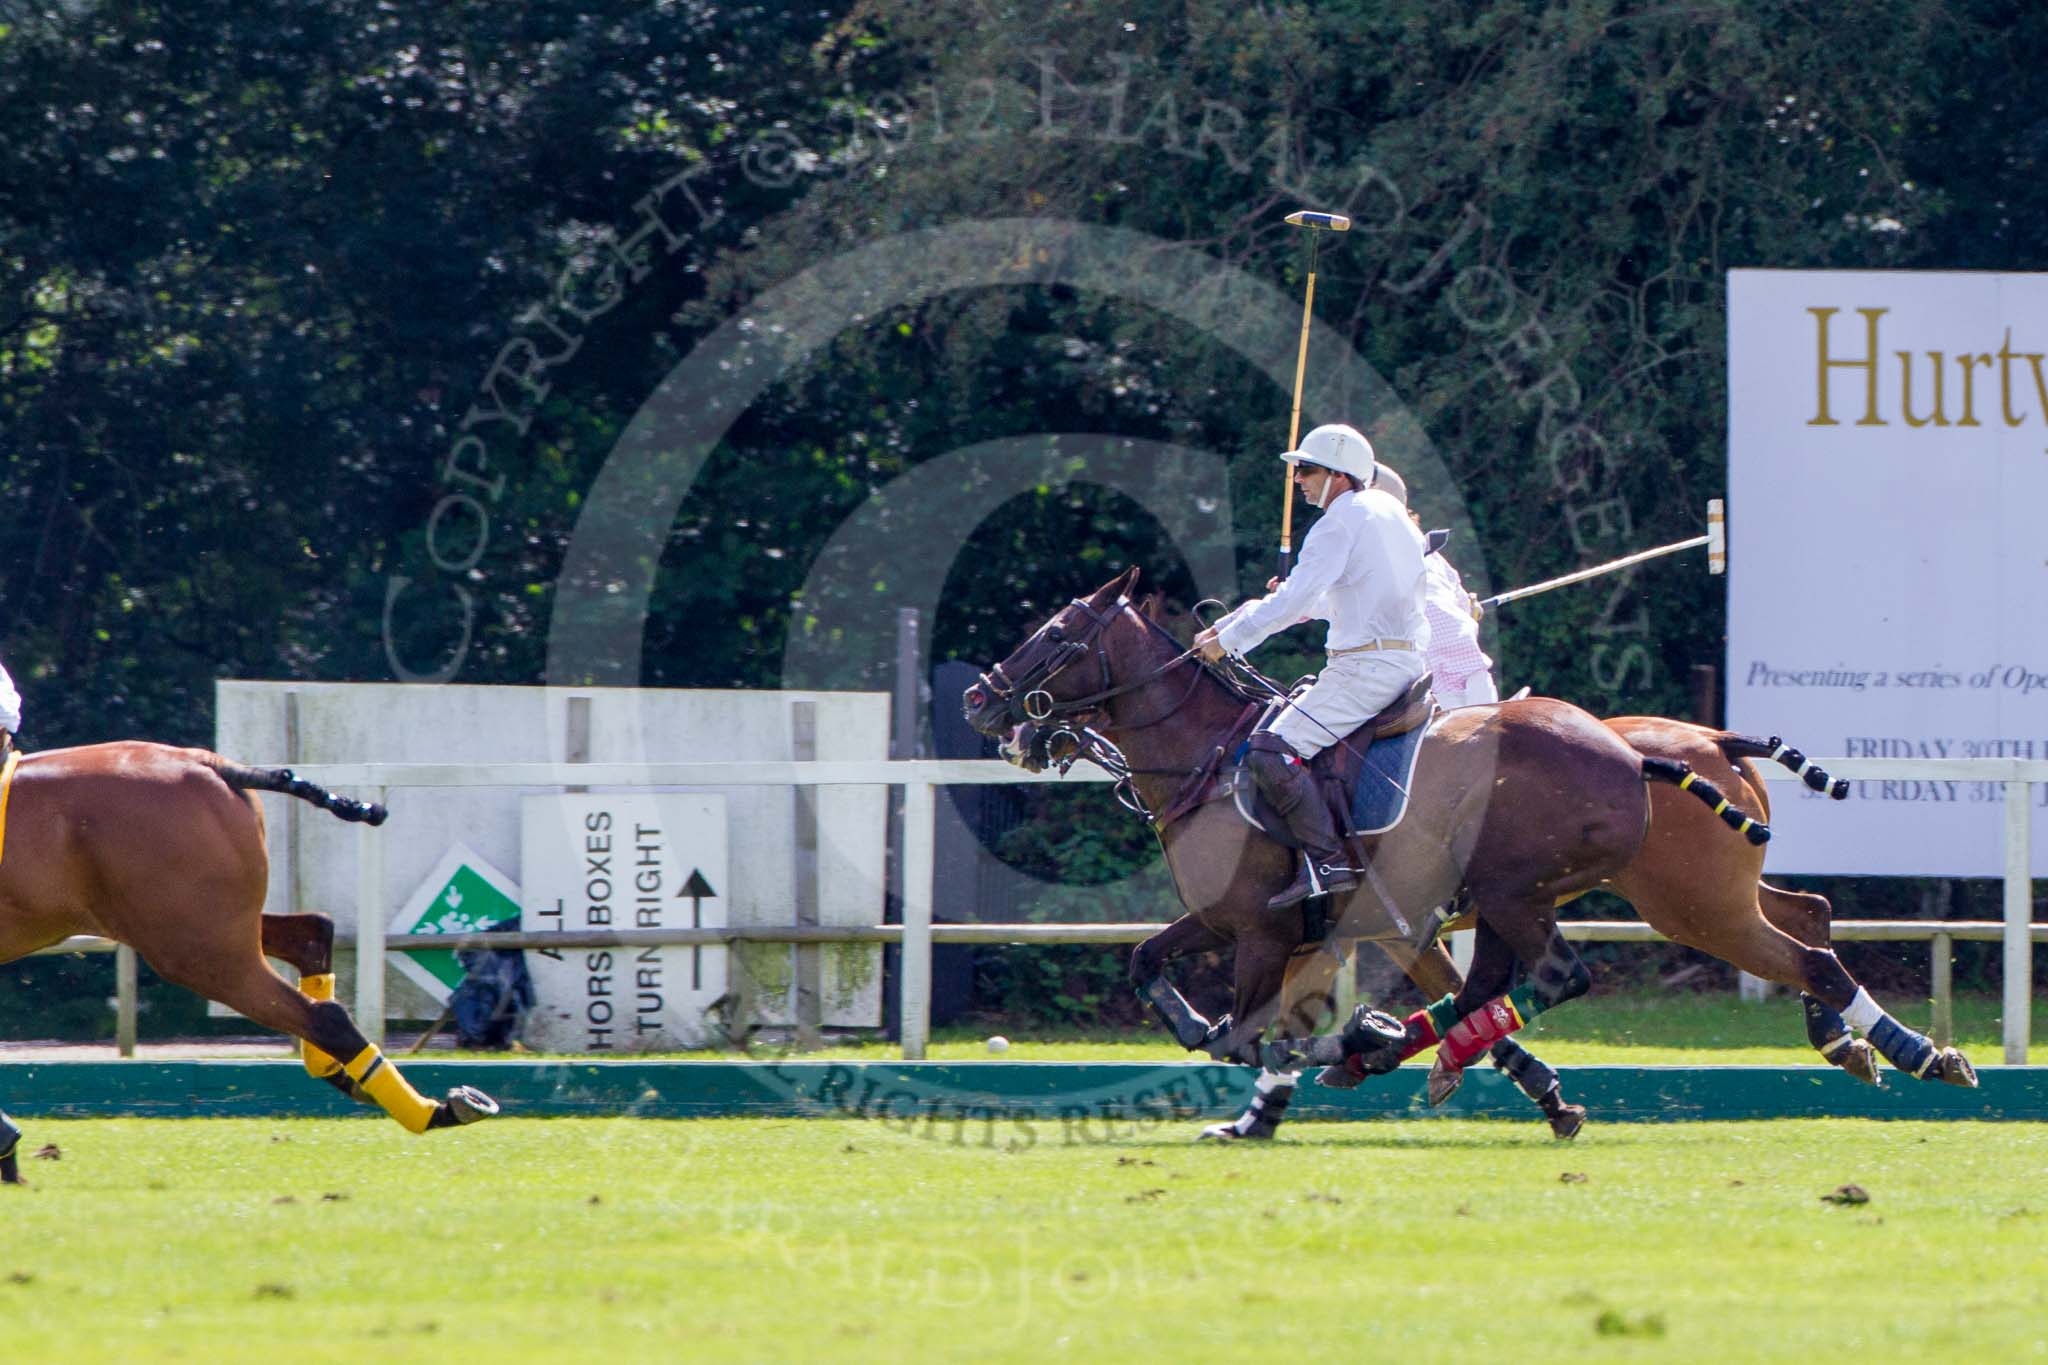 7th Heritage Polo Cup finals: Pepe Riglos of La Golondrina Argentina Polo Team..
Hurtwood Park Polo Club,
Ewhurst Green,
Surrey,
United Kingdom,
on 05 August 2012 at 15:20, image #154